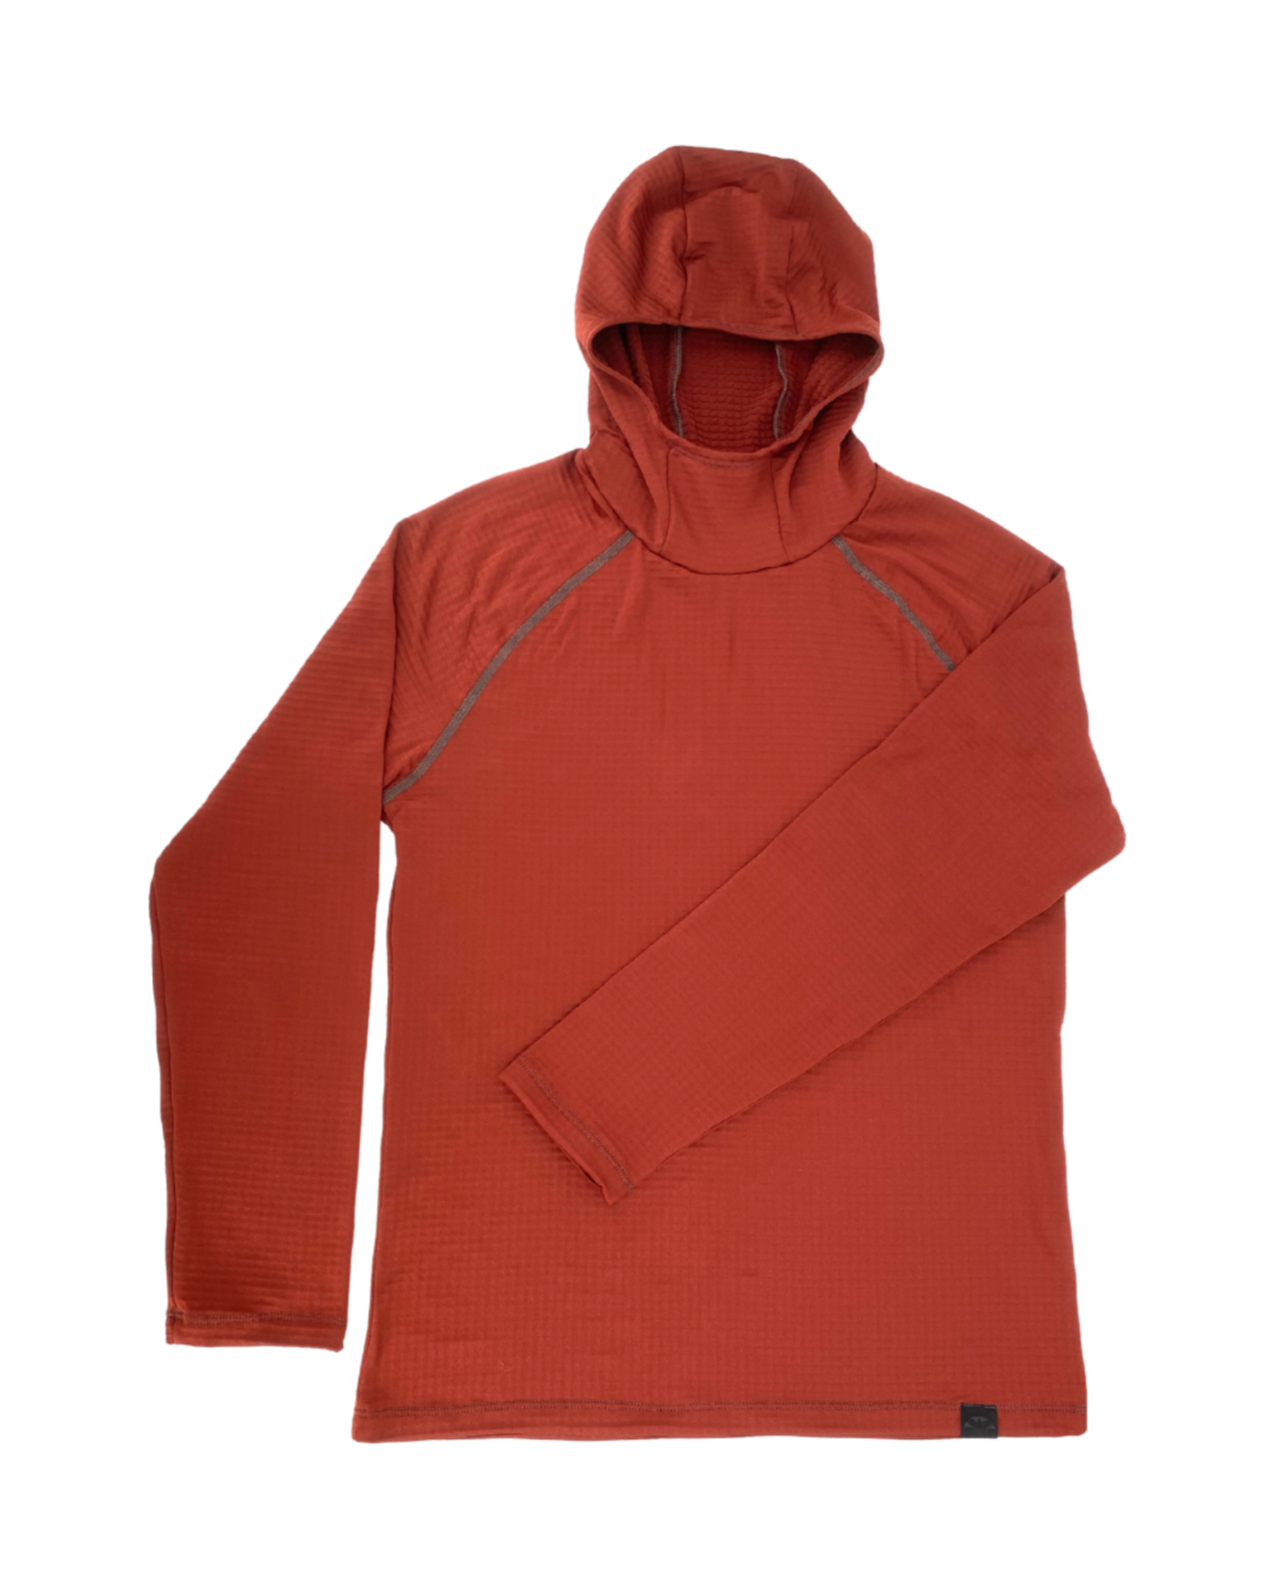 Tagert Hoody Men's - Clearance